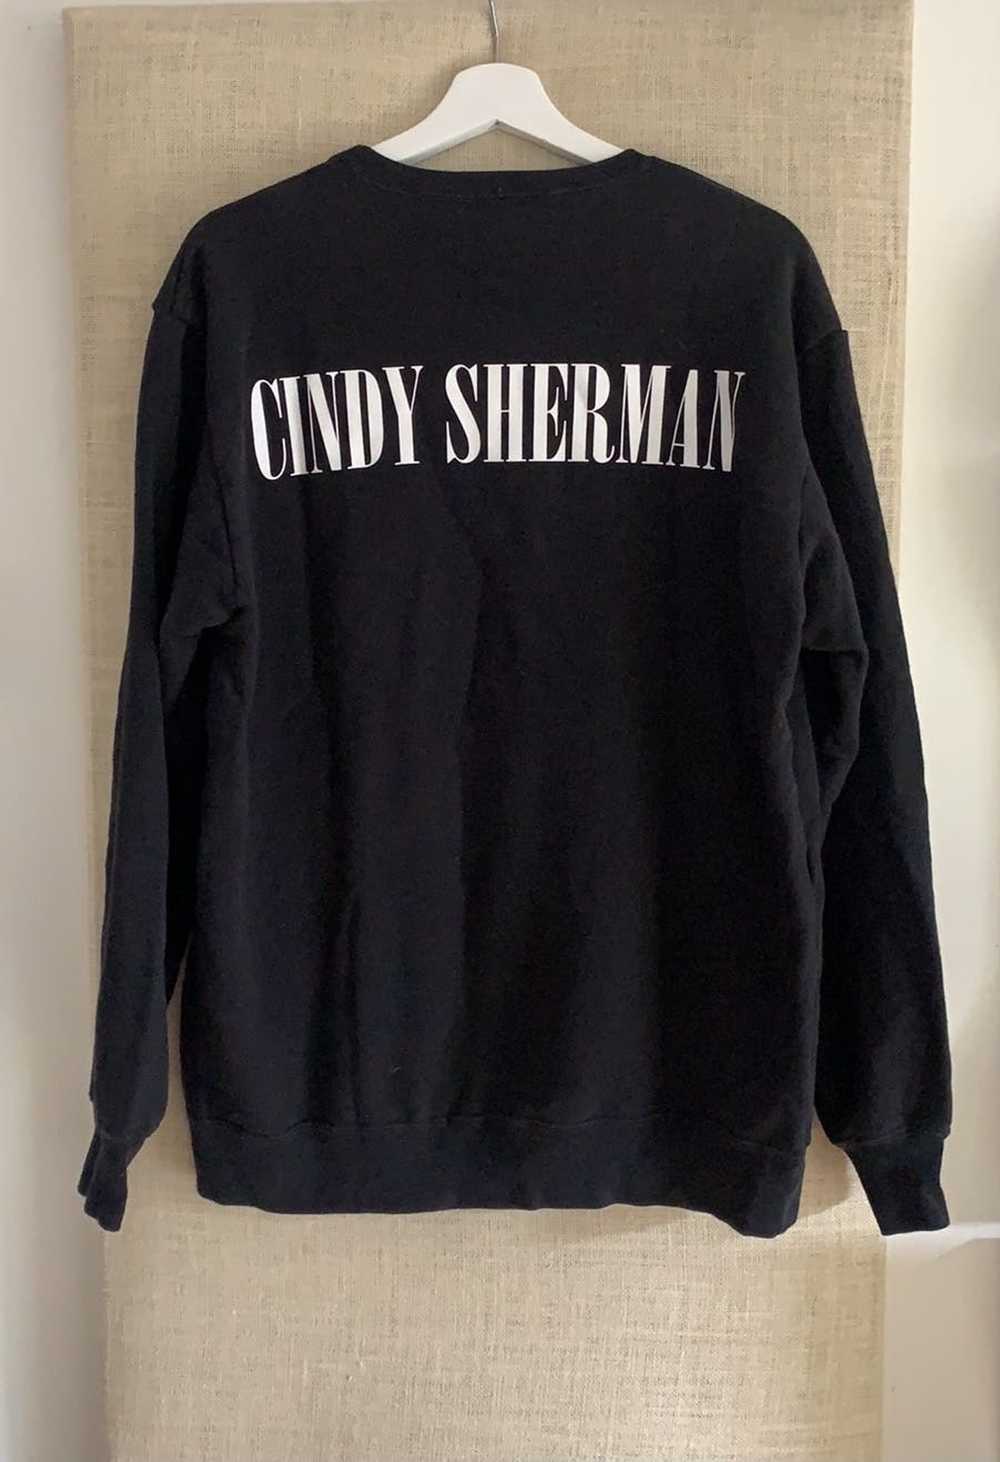 Undercover UNDERCOVER CINDY SHERMAN sweater - image 2